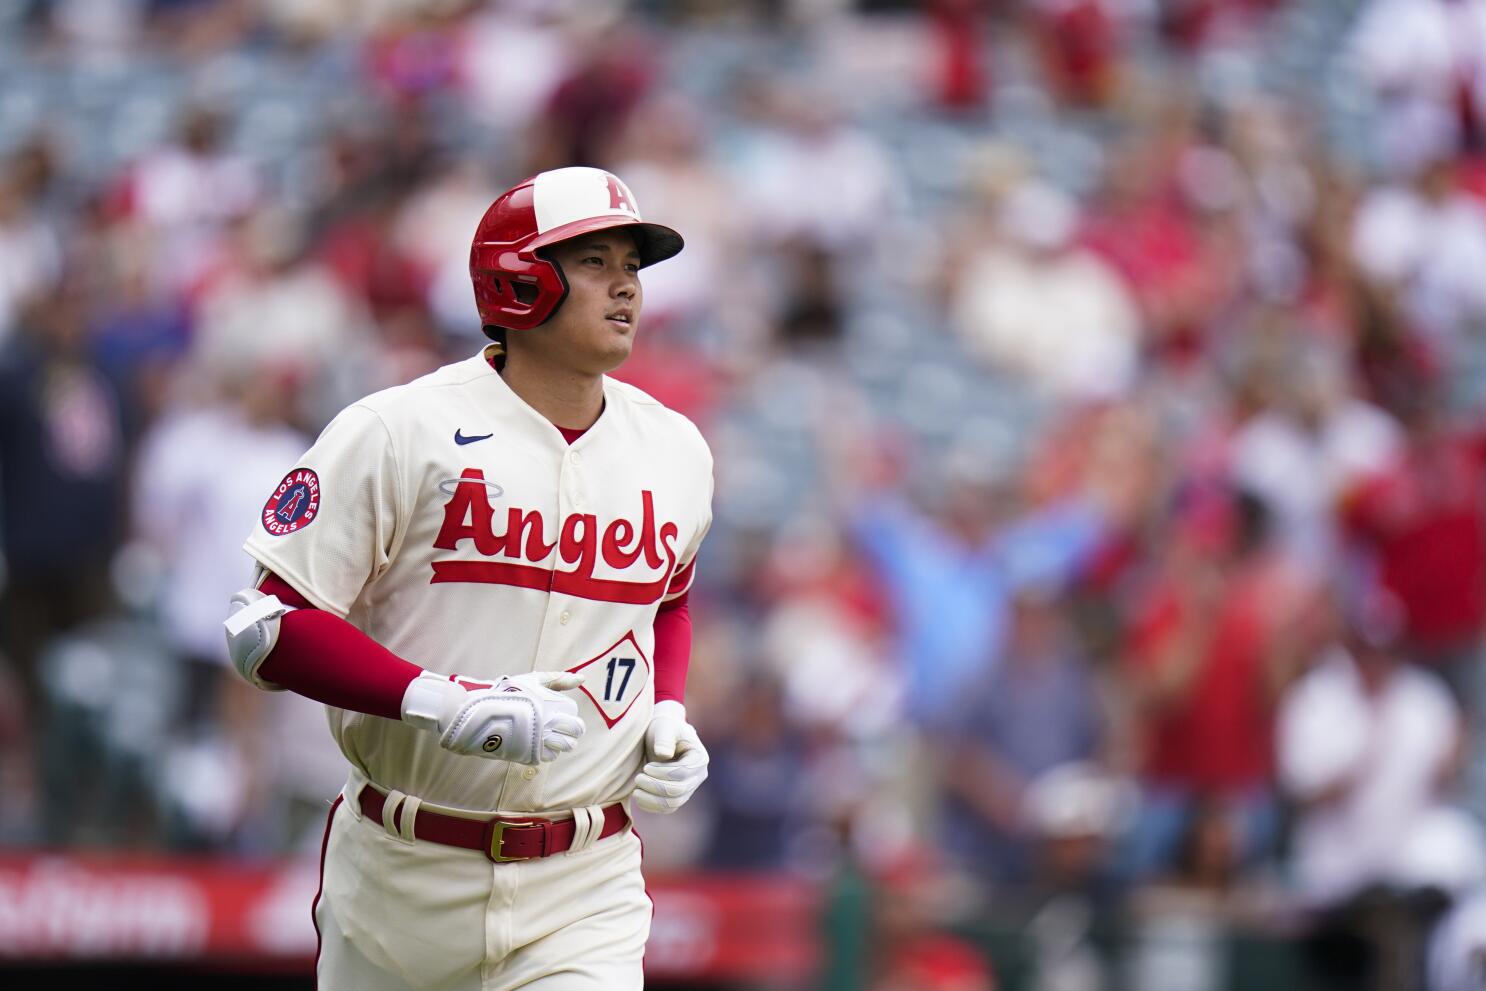 The Yankees Would Reportedly Push Hardest for Shohei Ohtani if